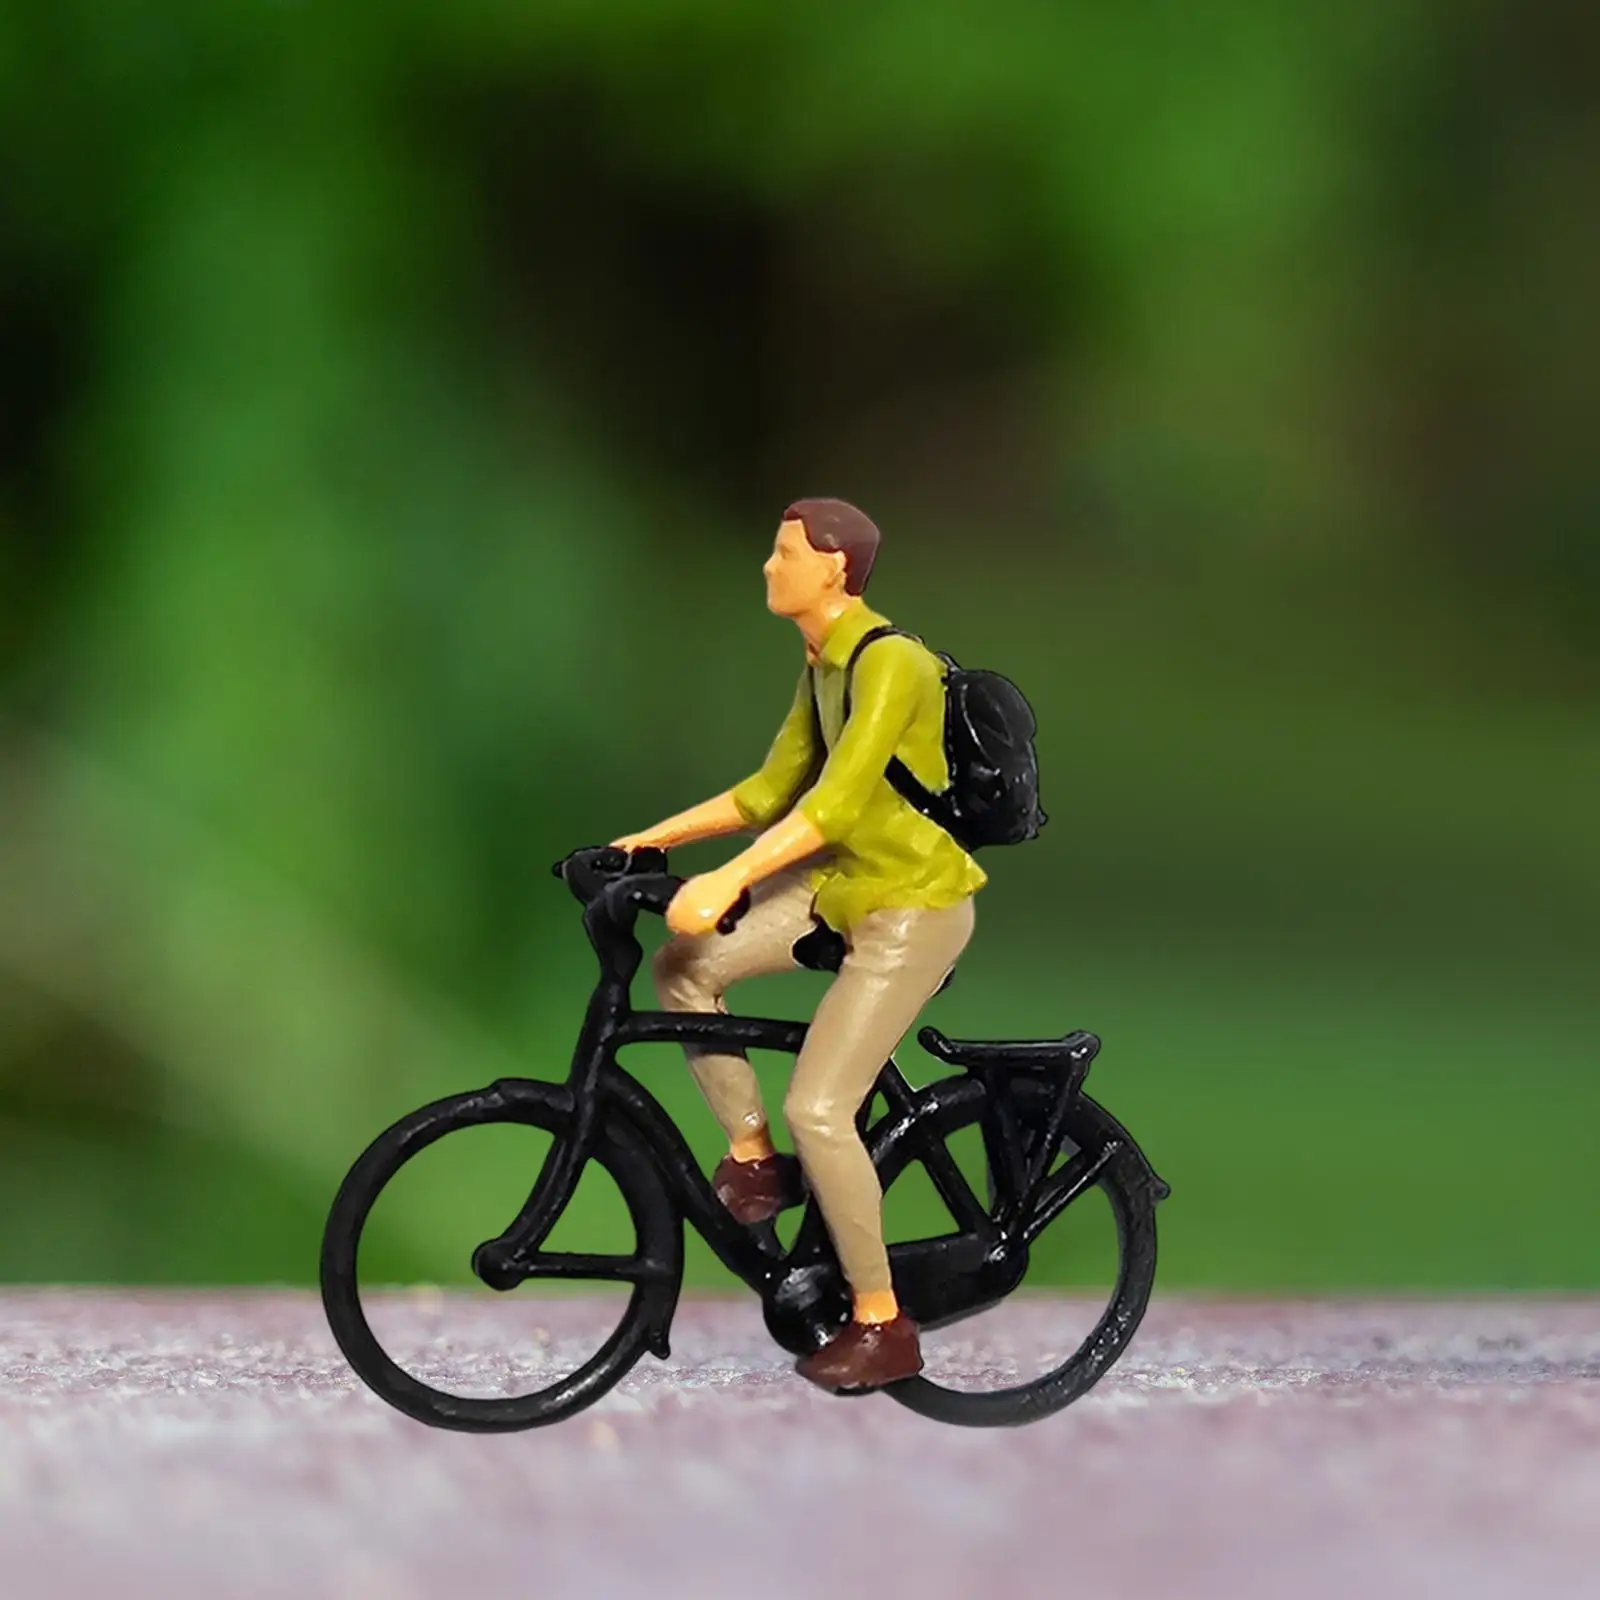 Resin 1/87 Scale Cyclist Figures Ornament for DIY Projects Sand Table Layout